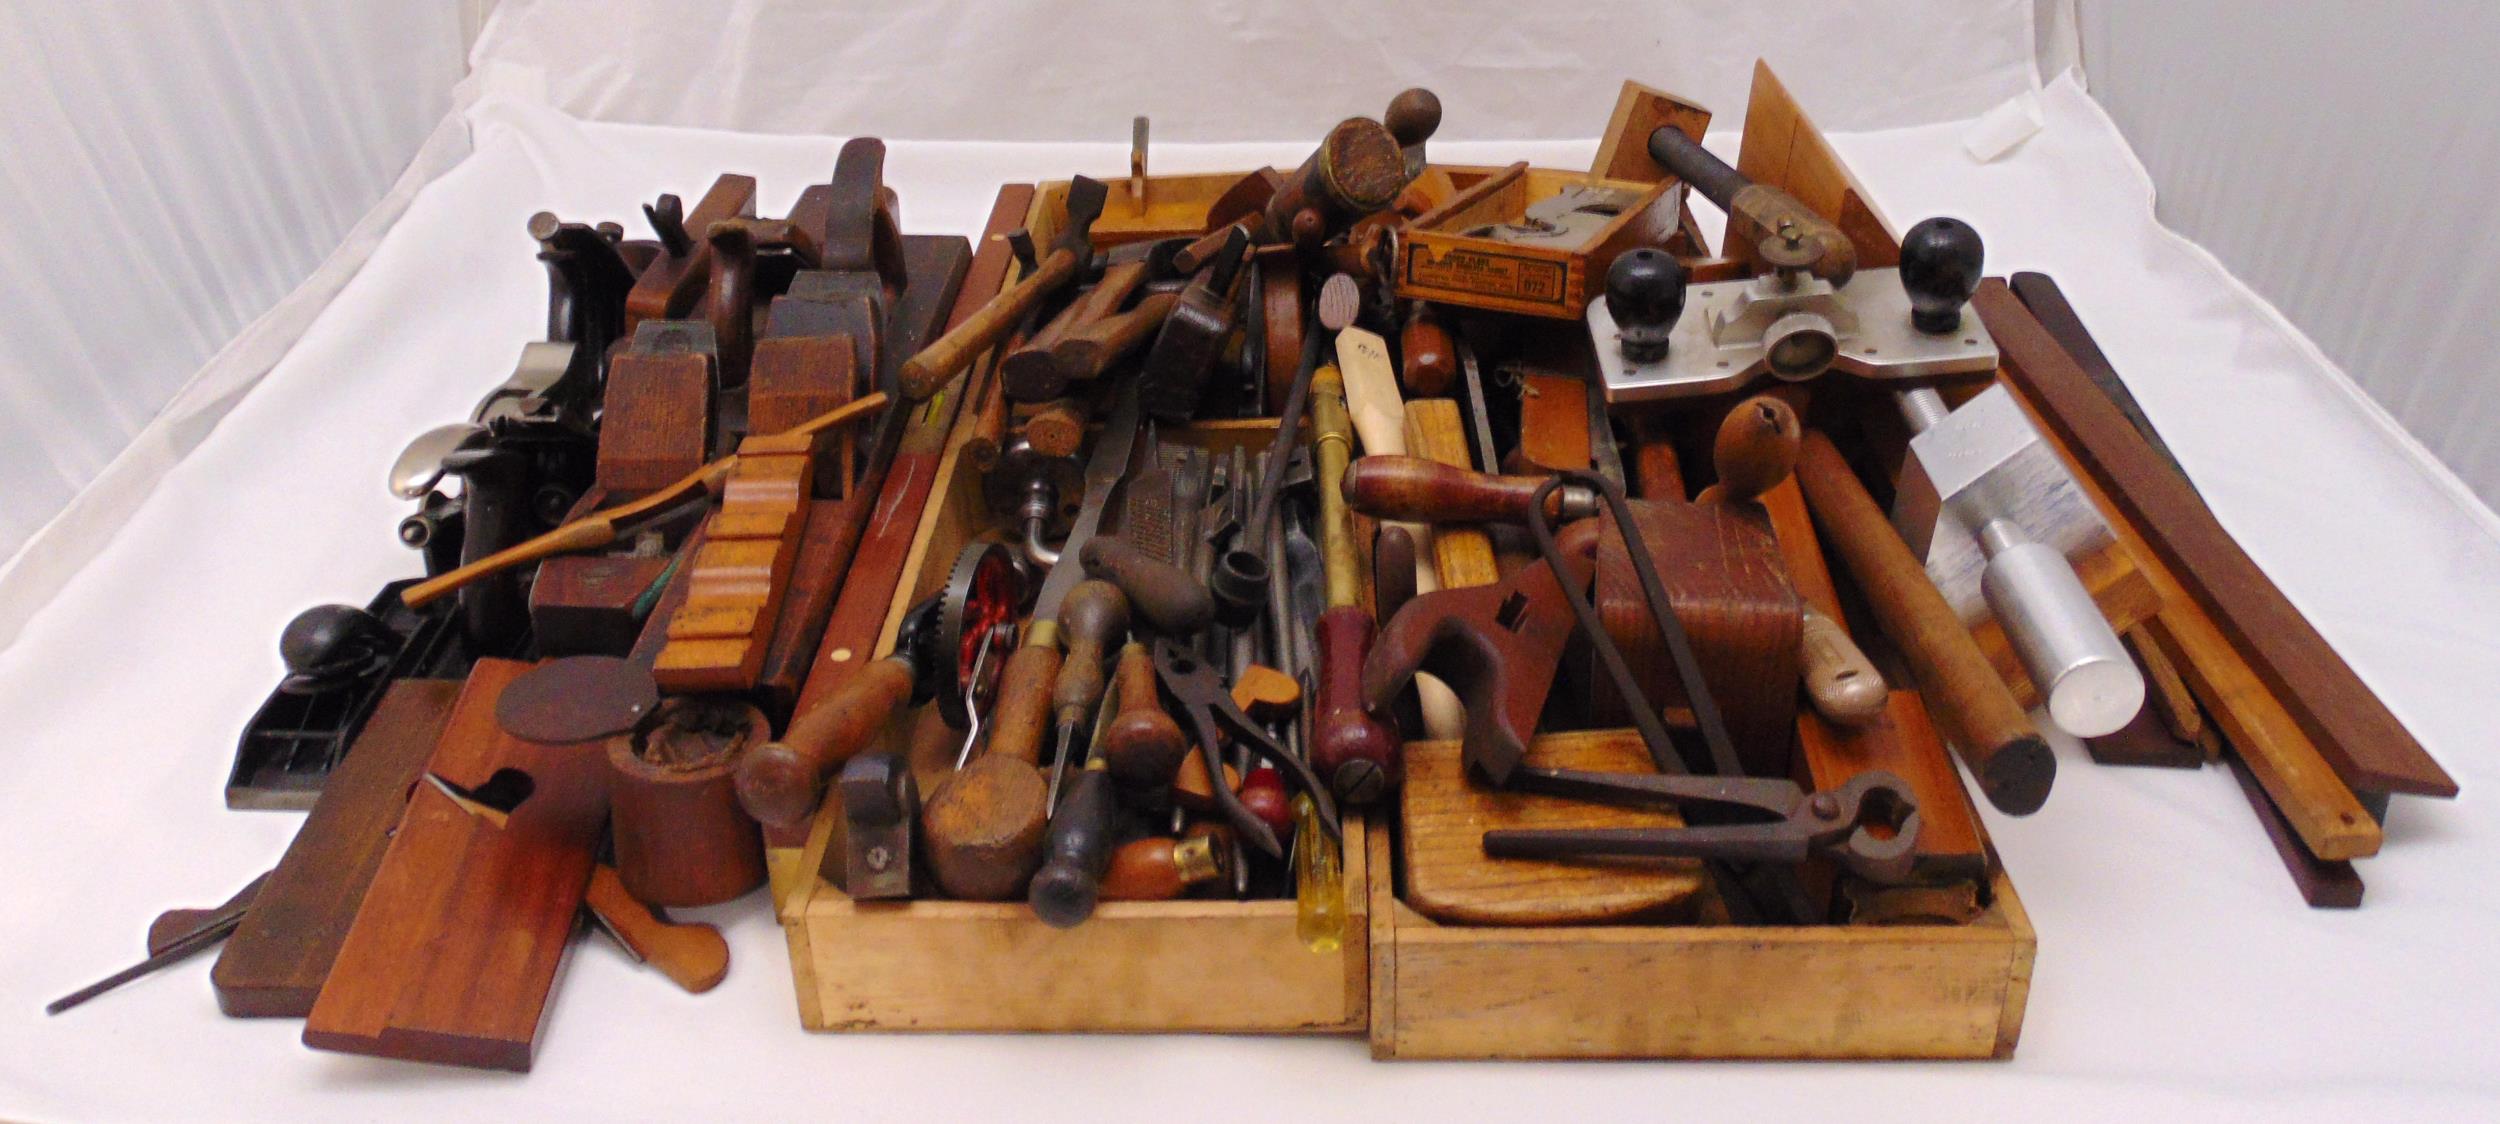 A quantity of vintage wood working tools to include mallets, hammers, planes, saws, gauges and